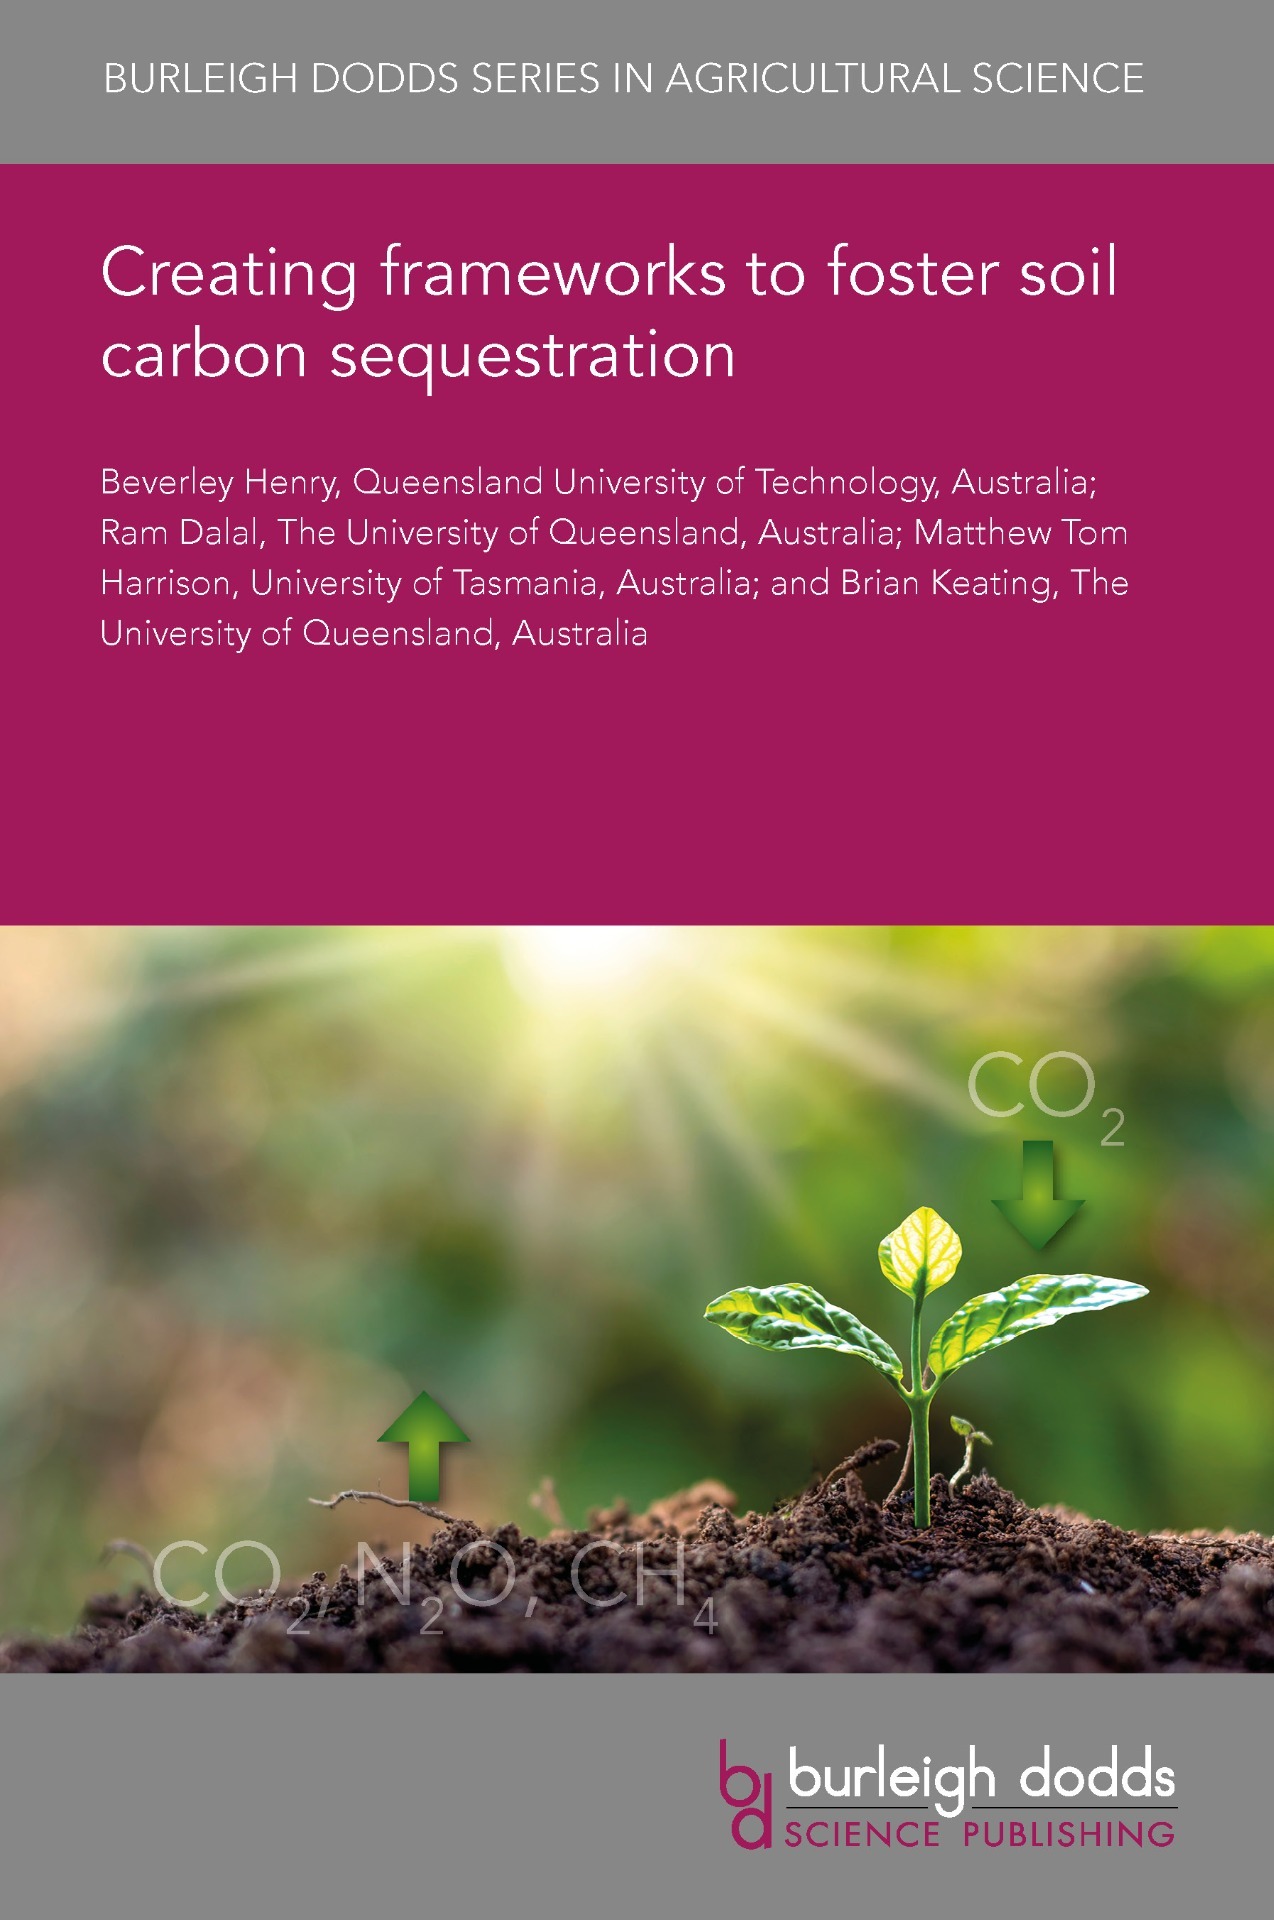 Creating frameworks to foster soil carbon sequestration